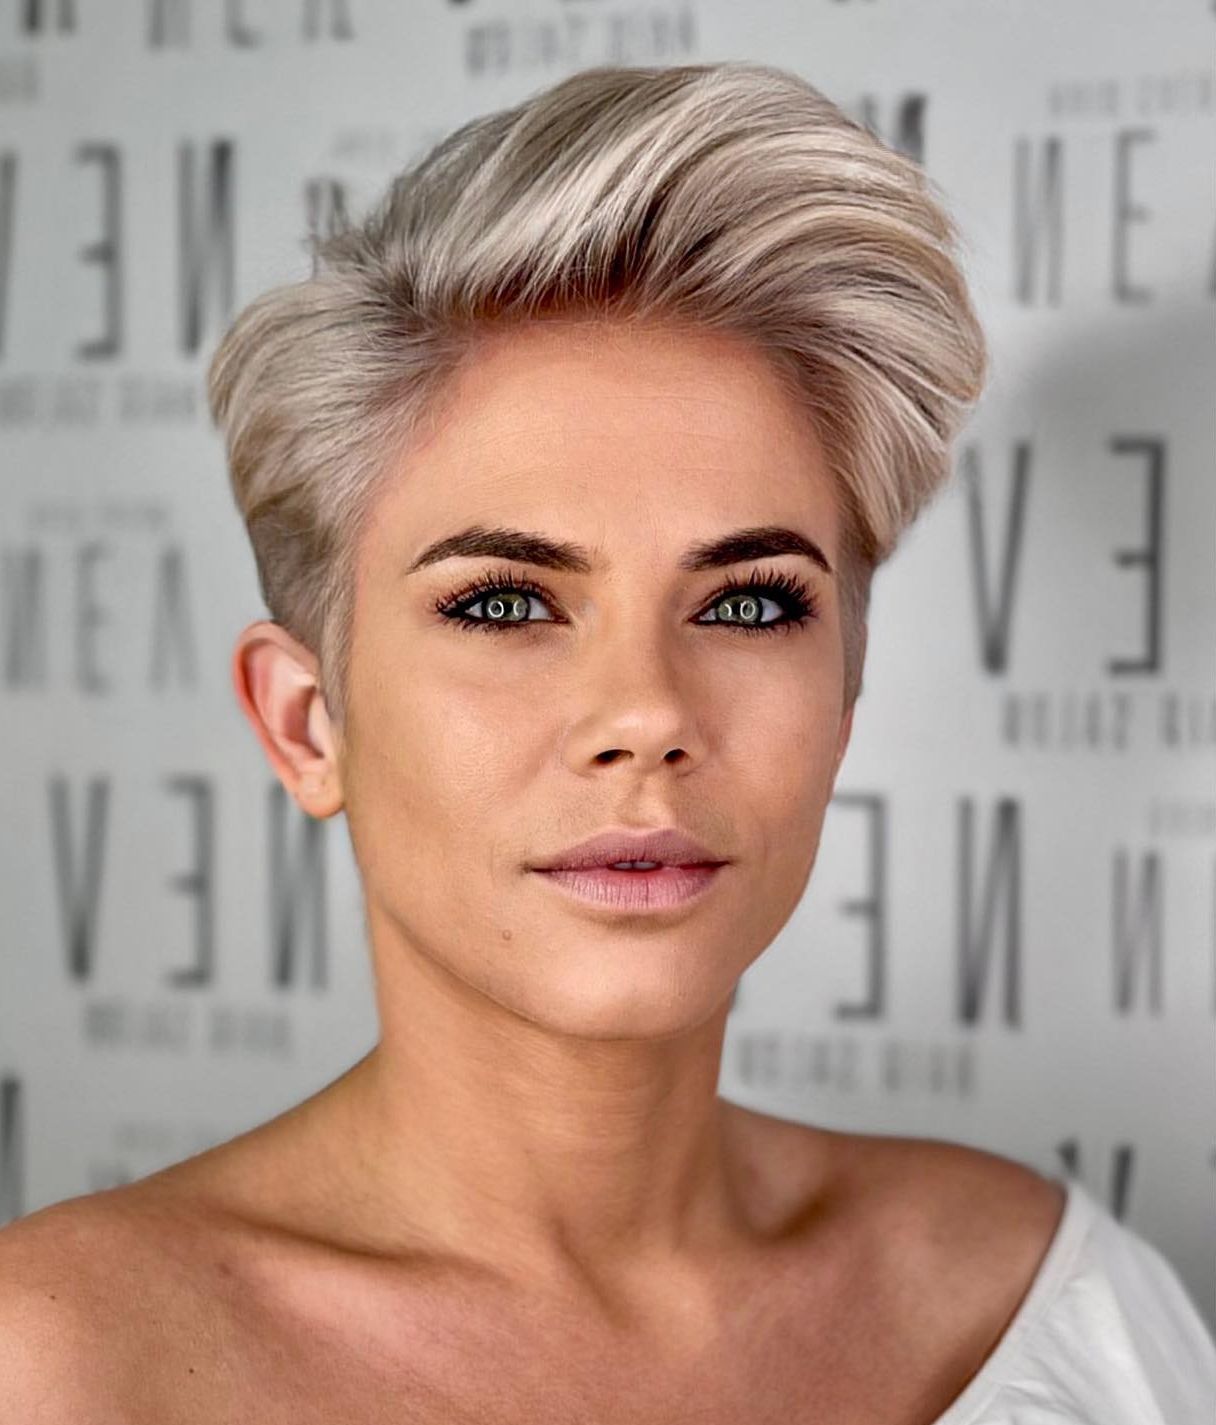 22 Exclusive Ideas To Style A Pixie Haircut – Hairstylery Throughout Voluminous Pixie Hairstyles With Wavy Texture (View 15 of 20)